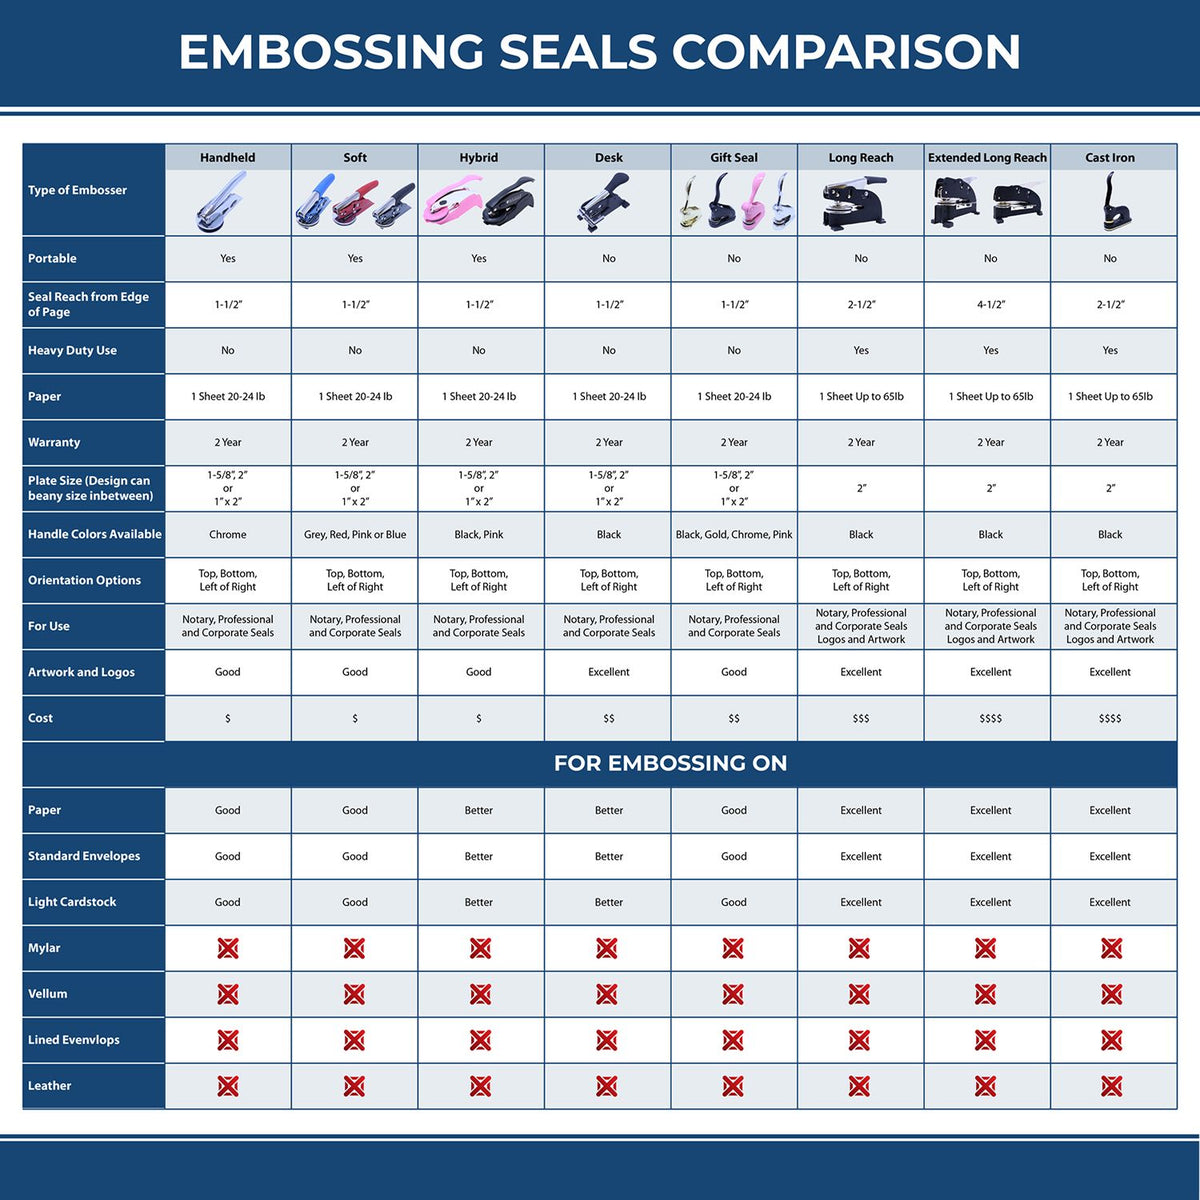 A comparison chart for the different types of mount models available for the Long Reach Arizona PE Seal.